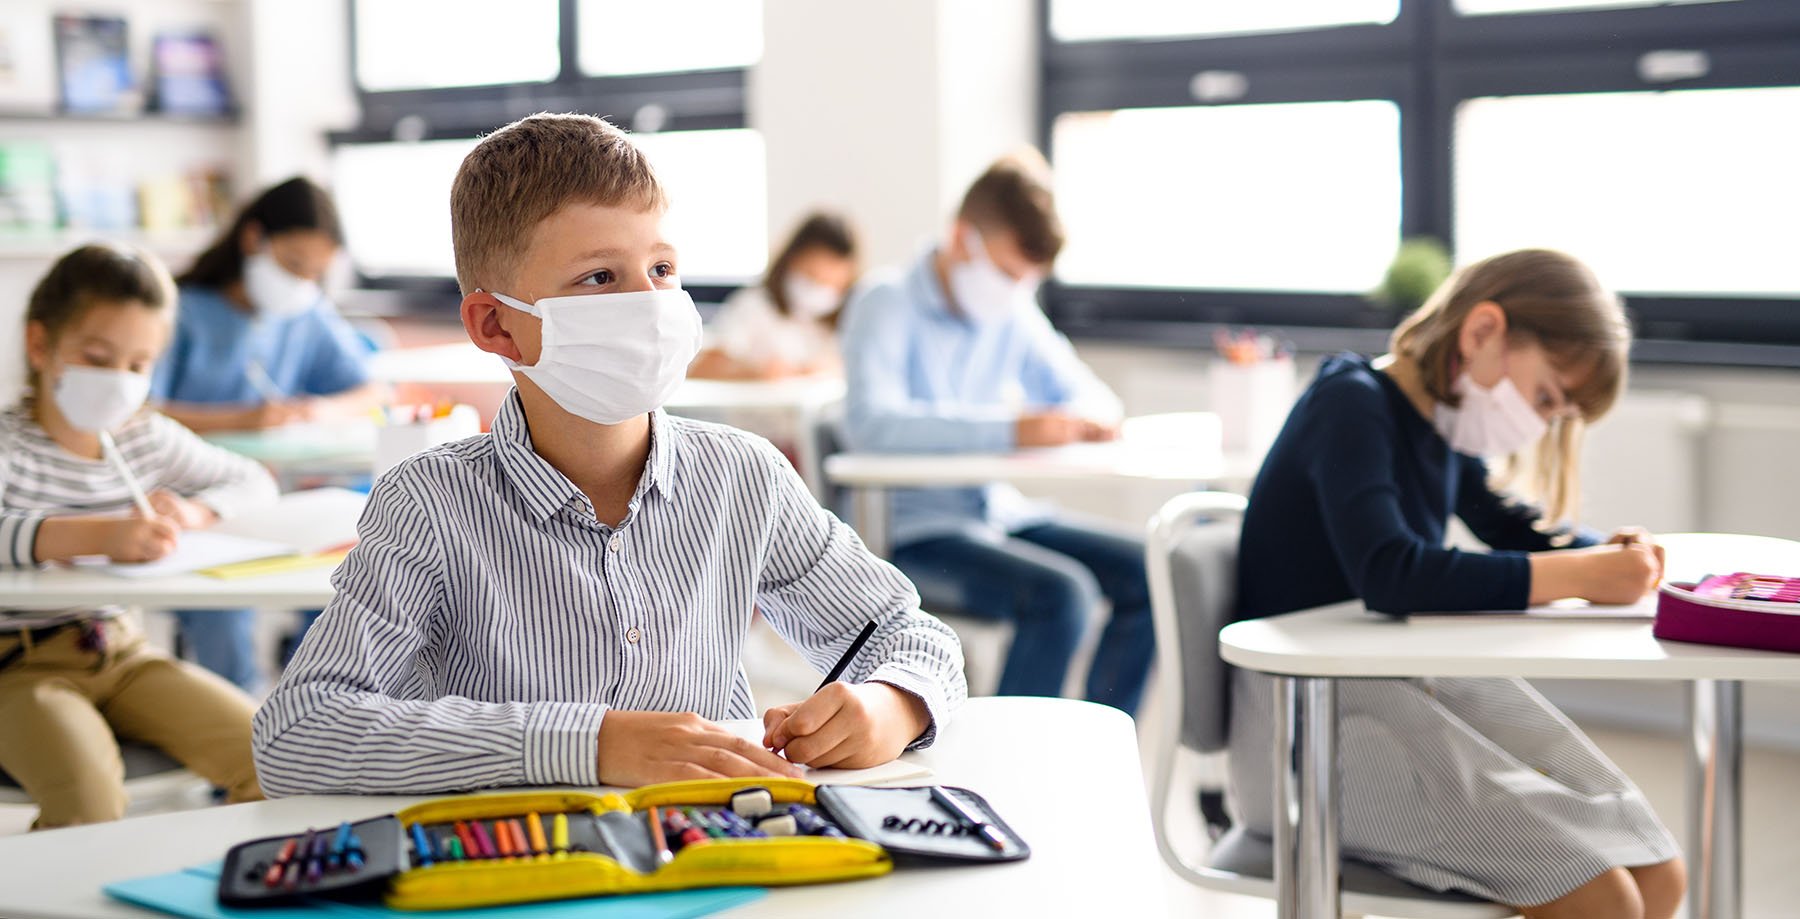 Boy Wearing a Mask at Desk in Classroom